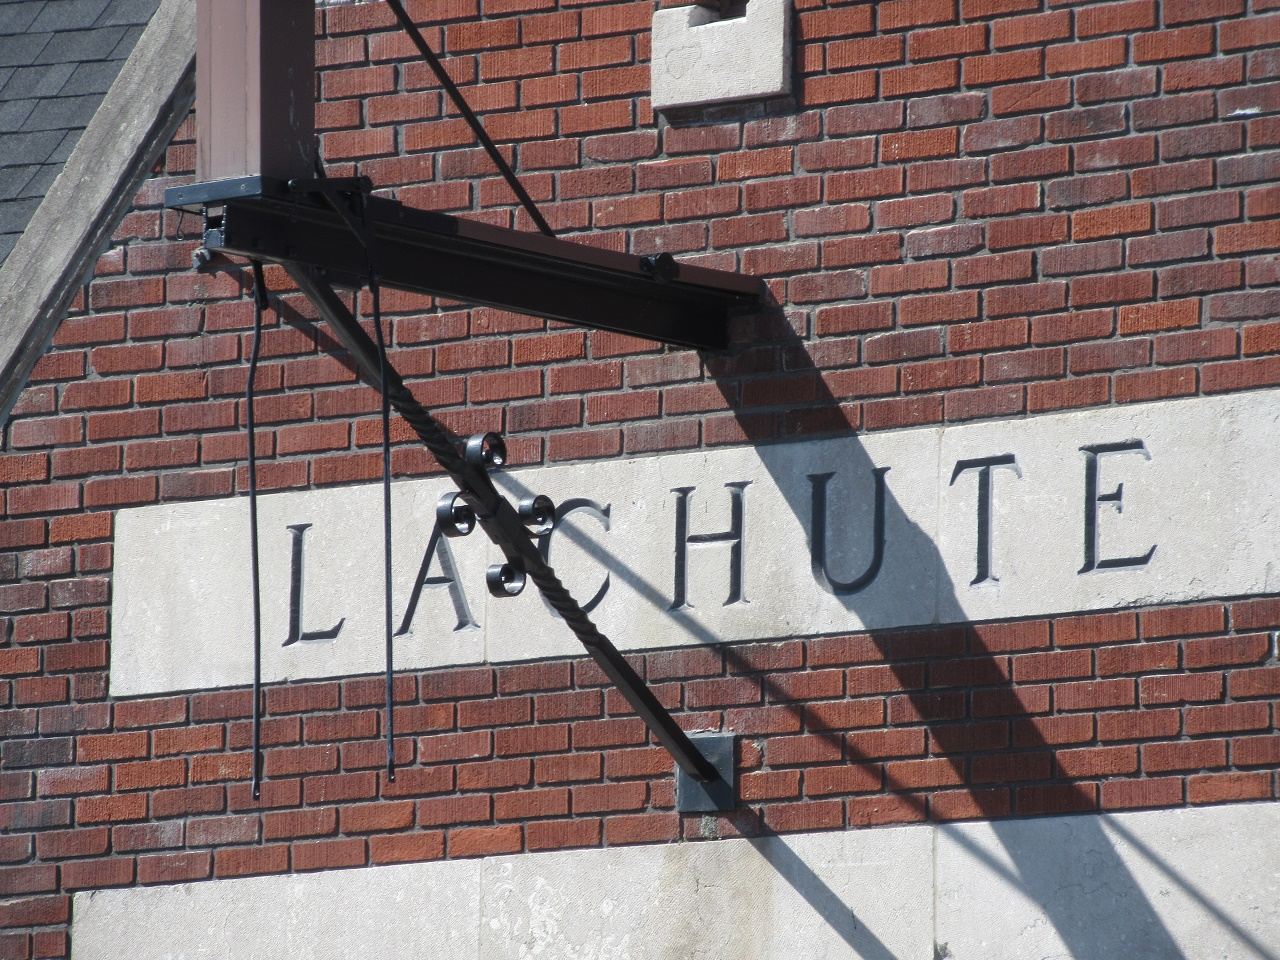 Lachute maintains COVID-19 restrictions at municipal facilities, but offers alternatives for March break activities